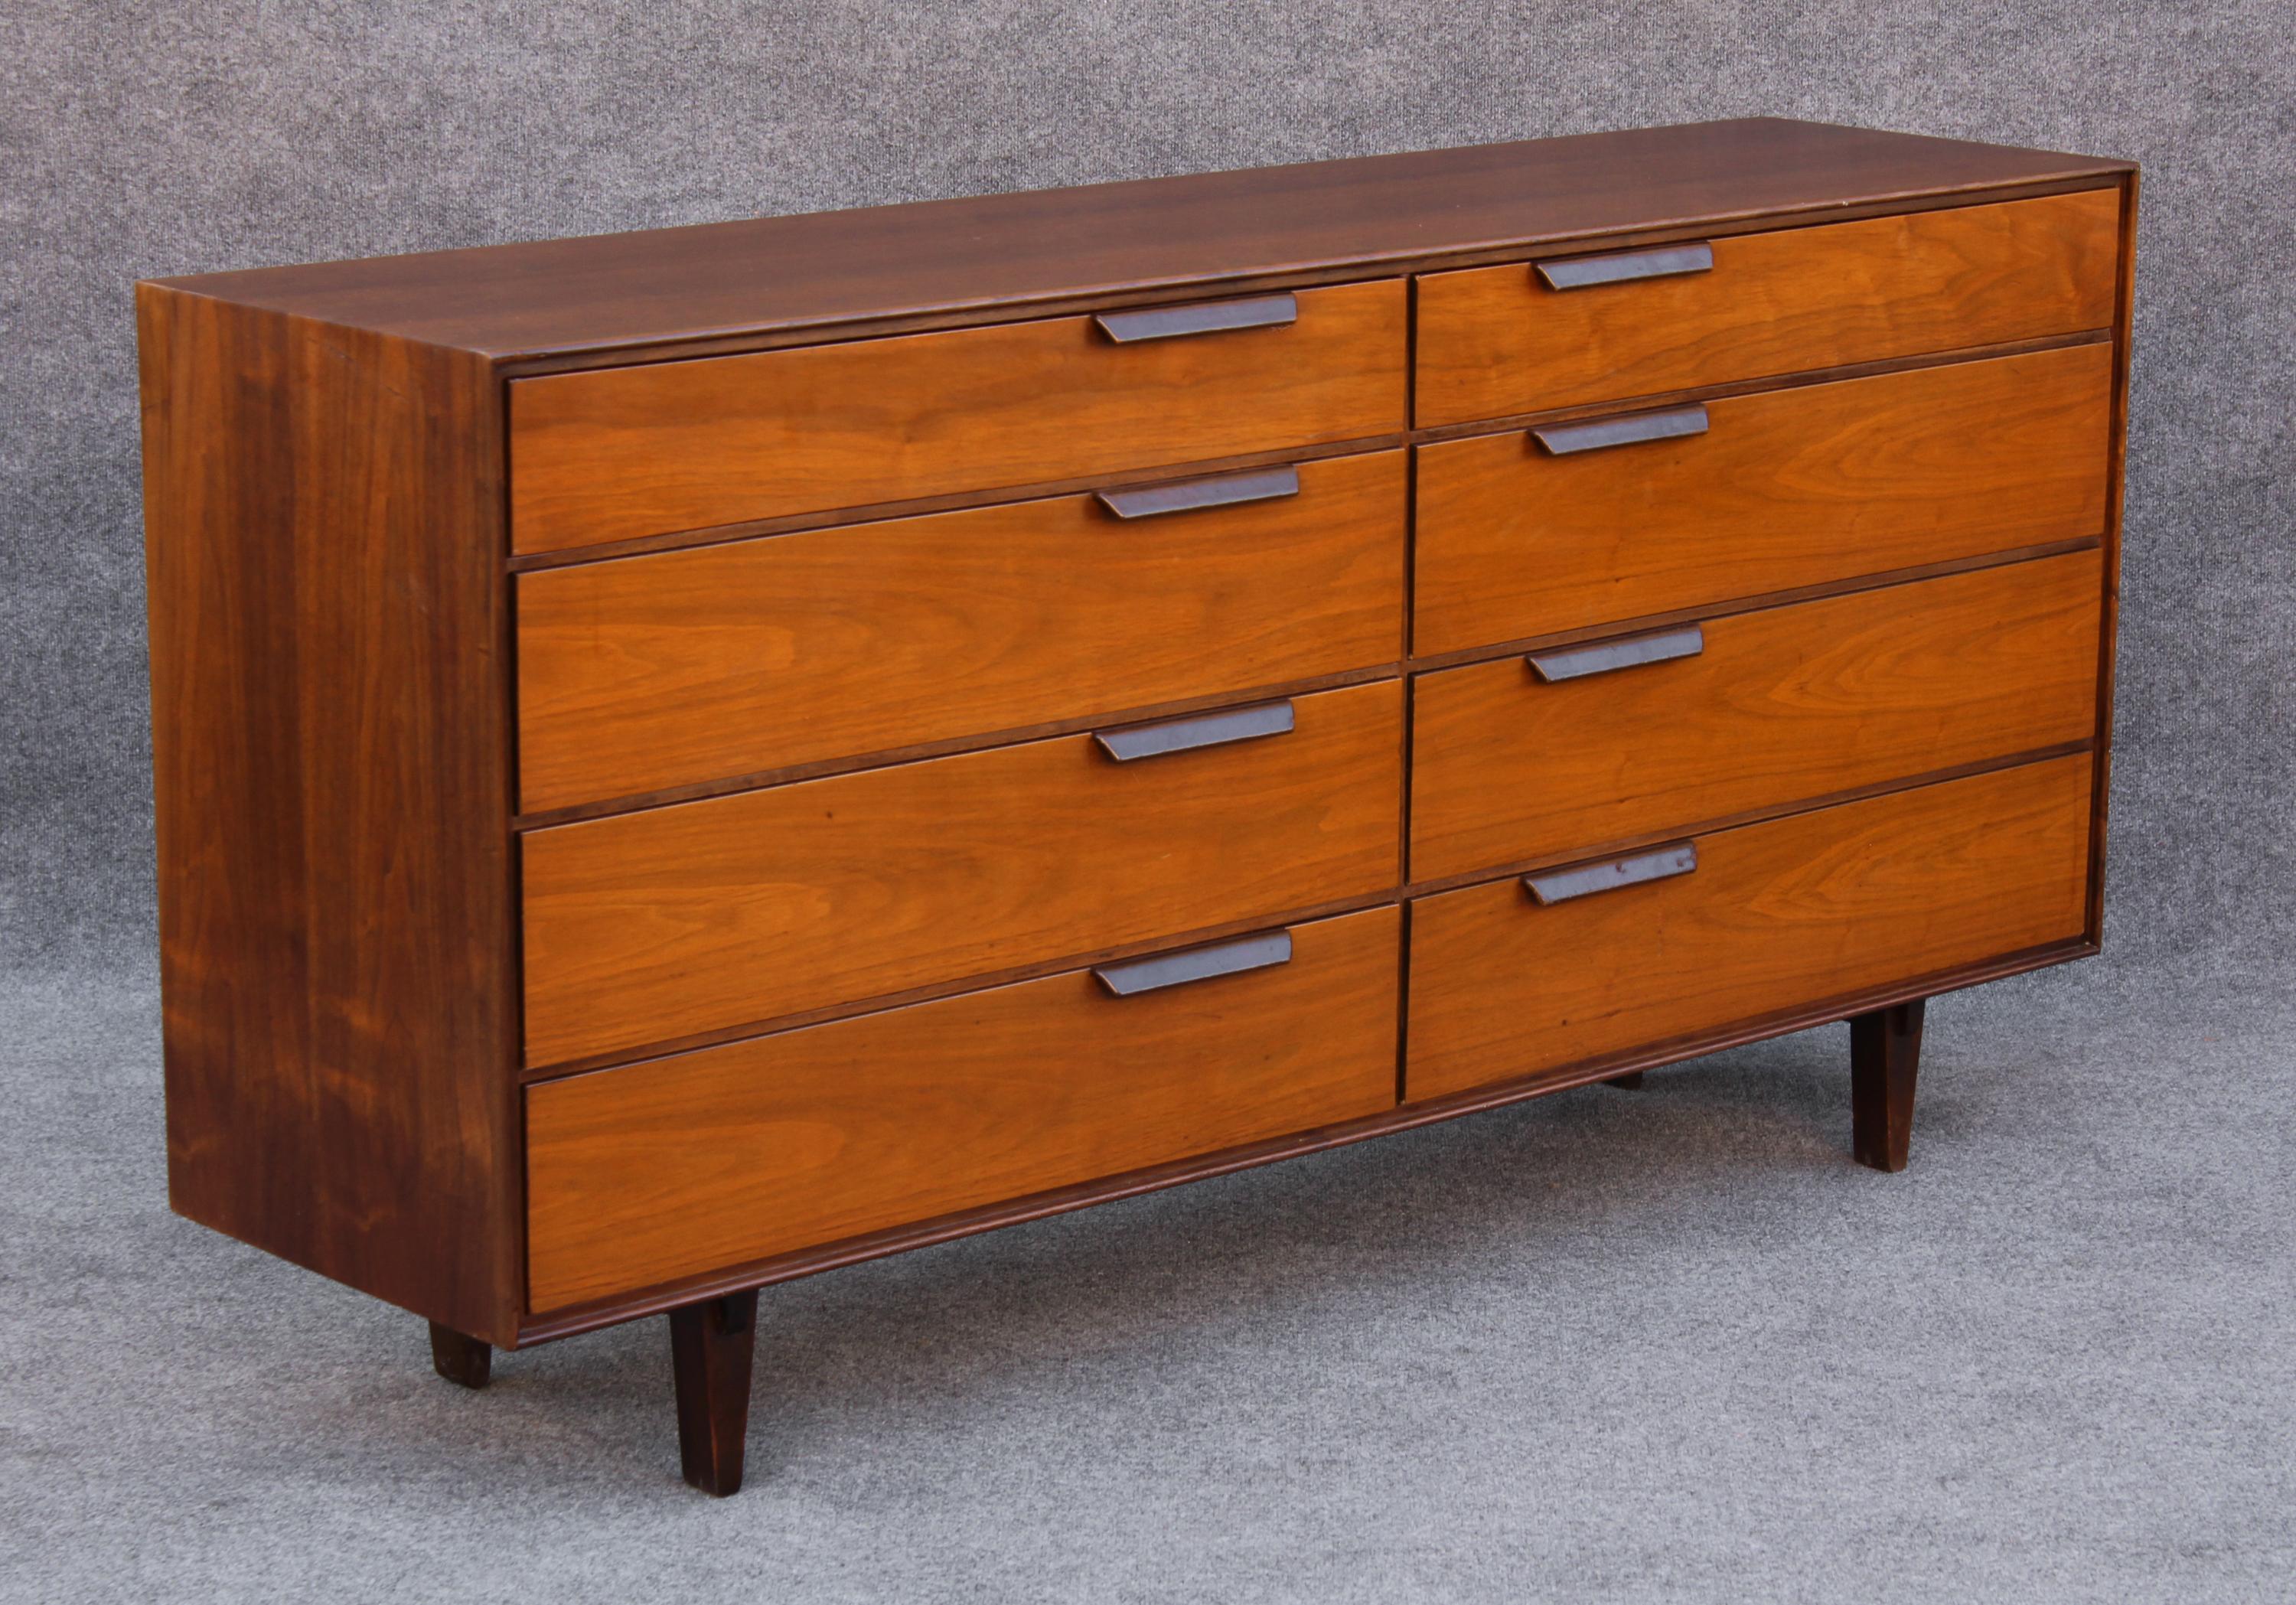 Restored Edward Wormley Dunbar Walnut & Leather 8-Drawer Dresser or Cabinet In Good Condition For Sale In Philadelphia, PA